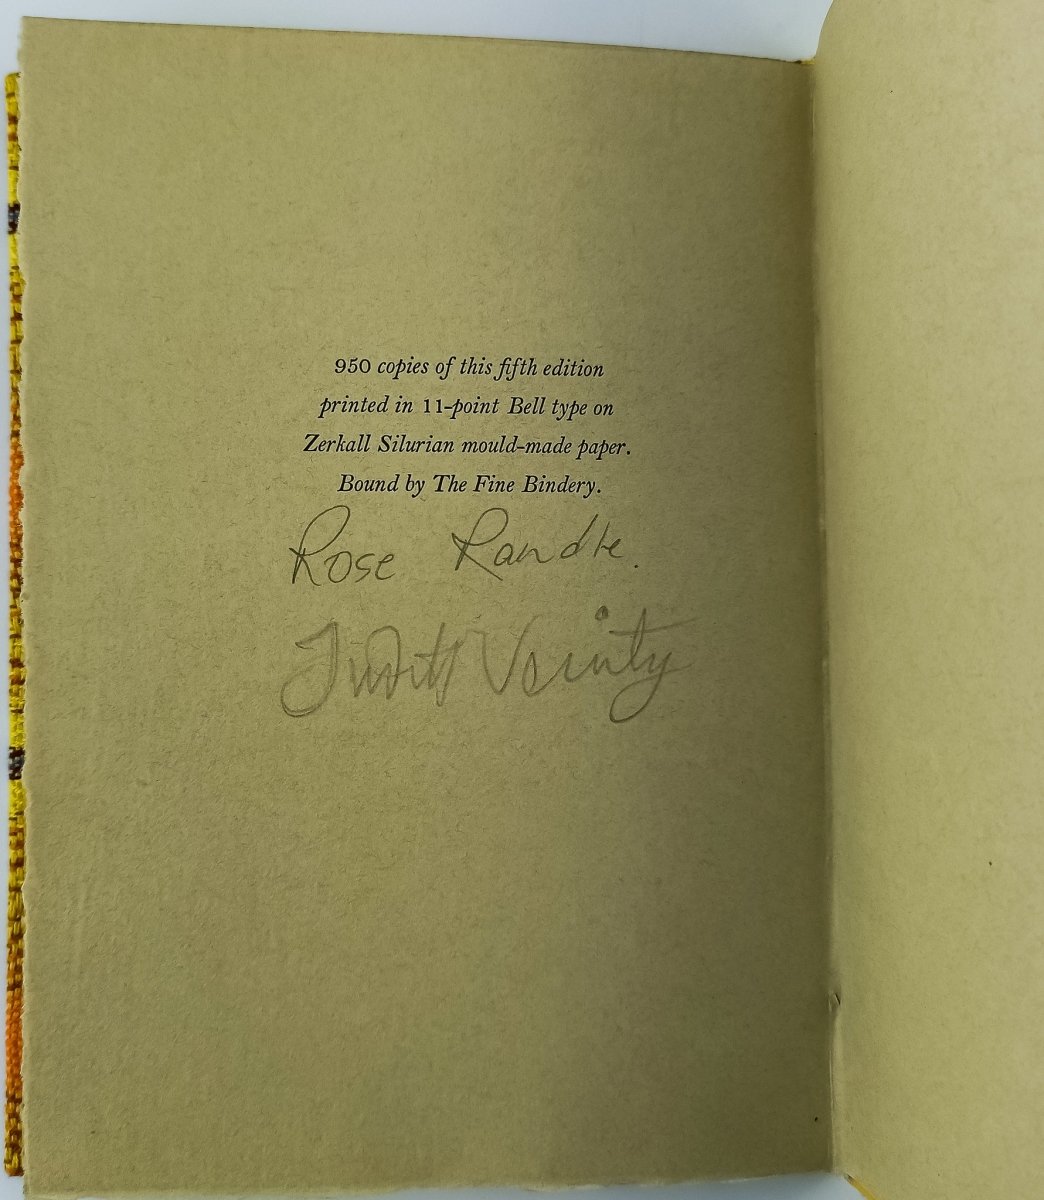 Randle, Rosalind - Rose's Aga Recipes - one of 10 special copies - SIGNED | book detail 5